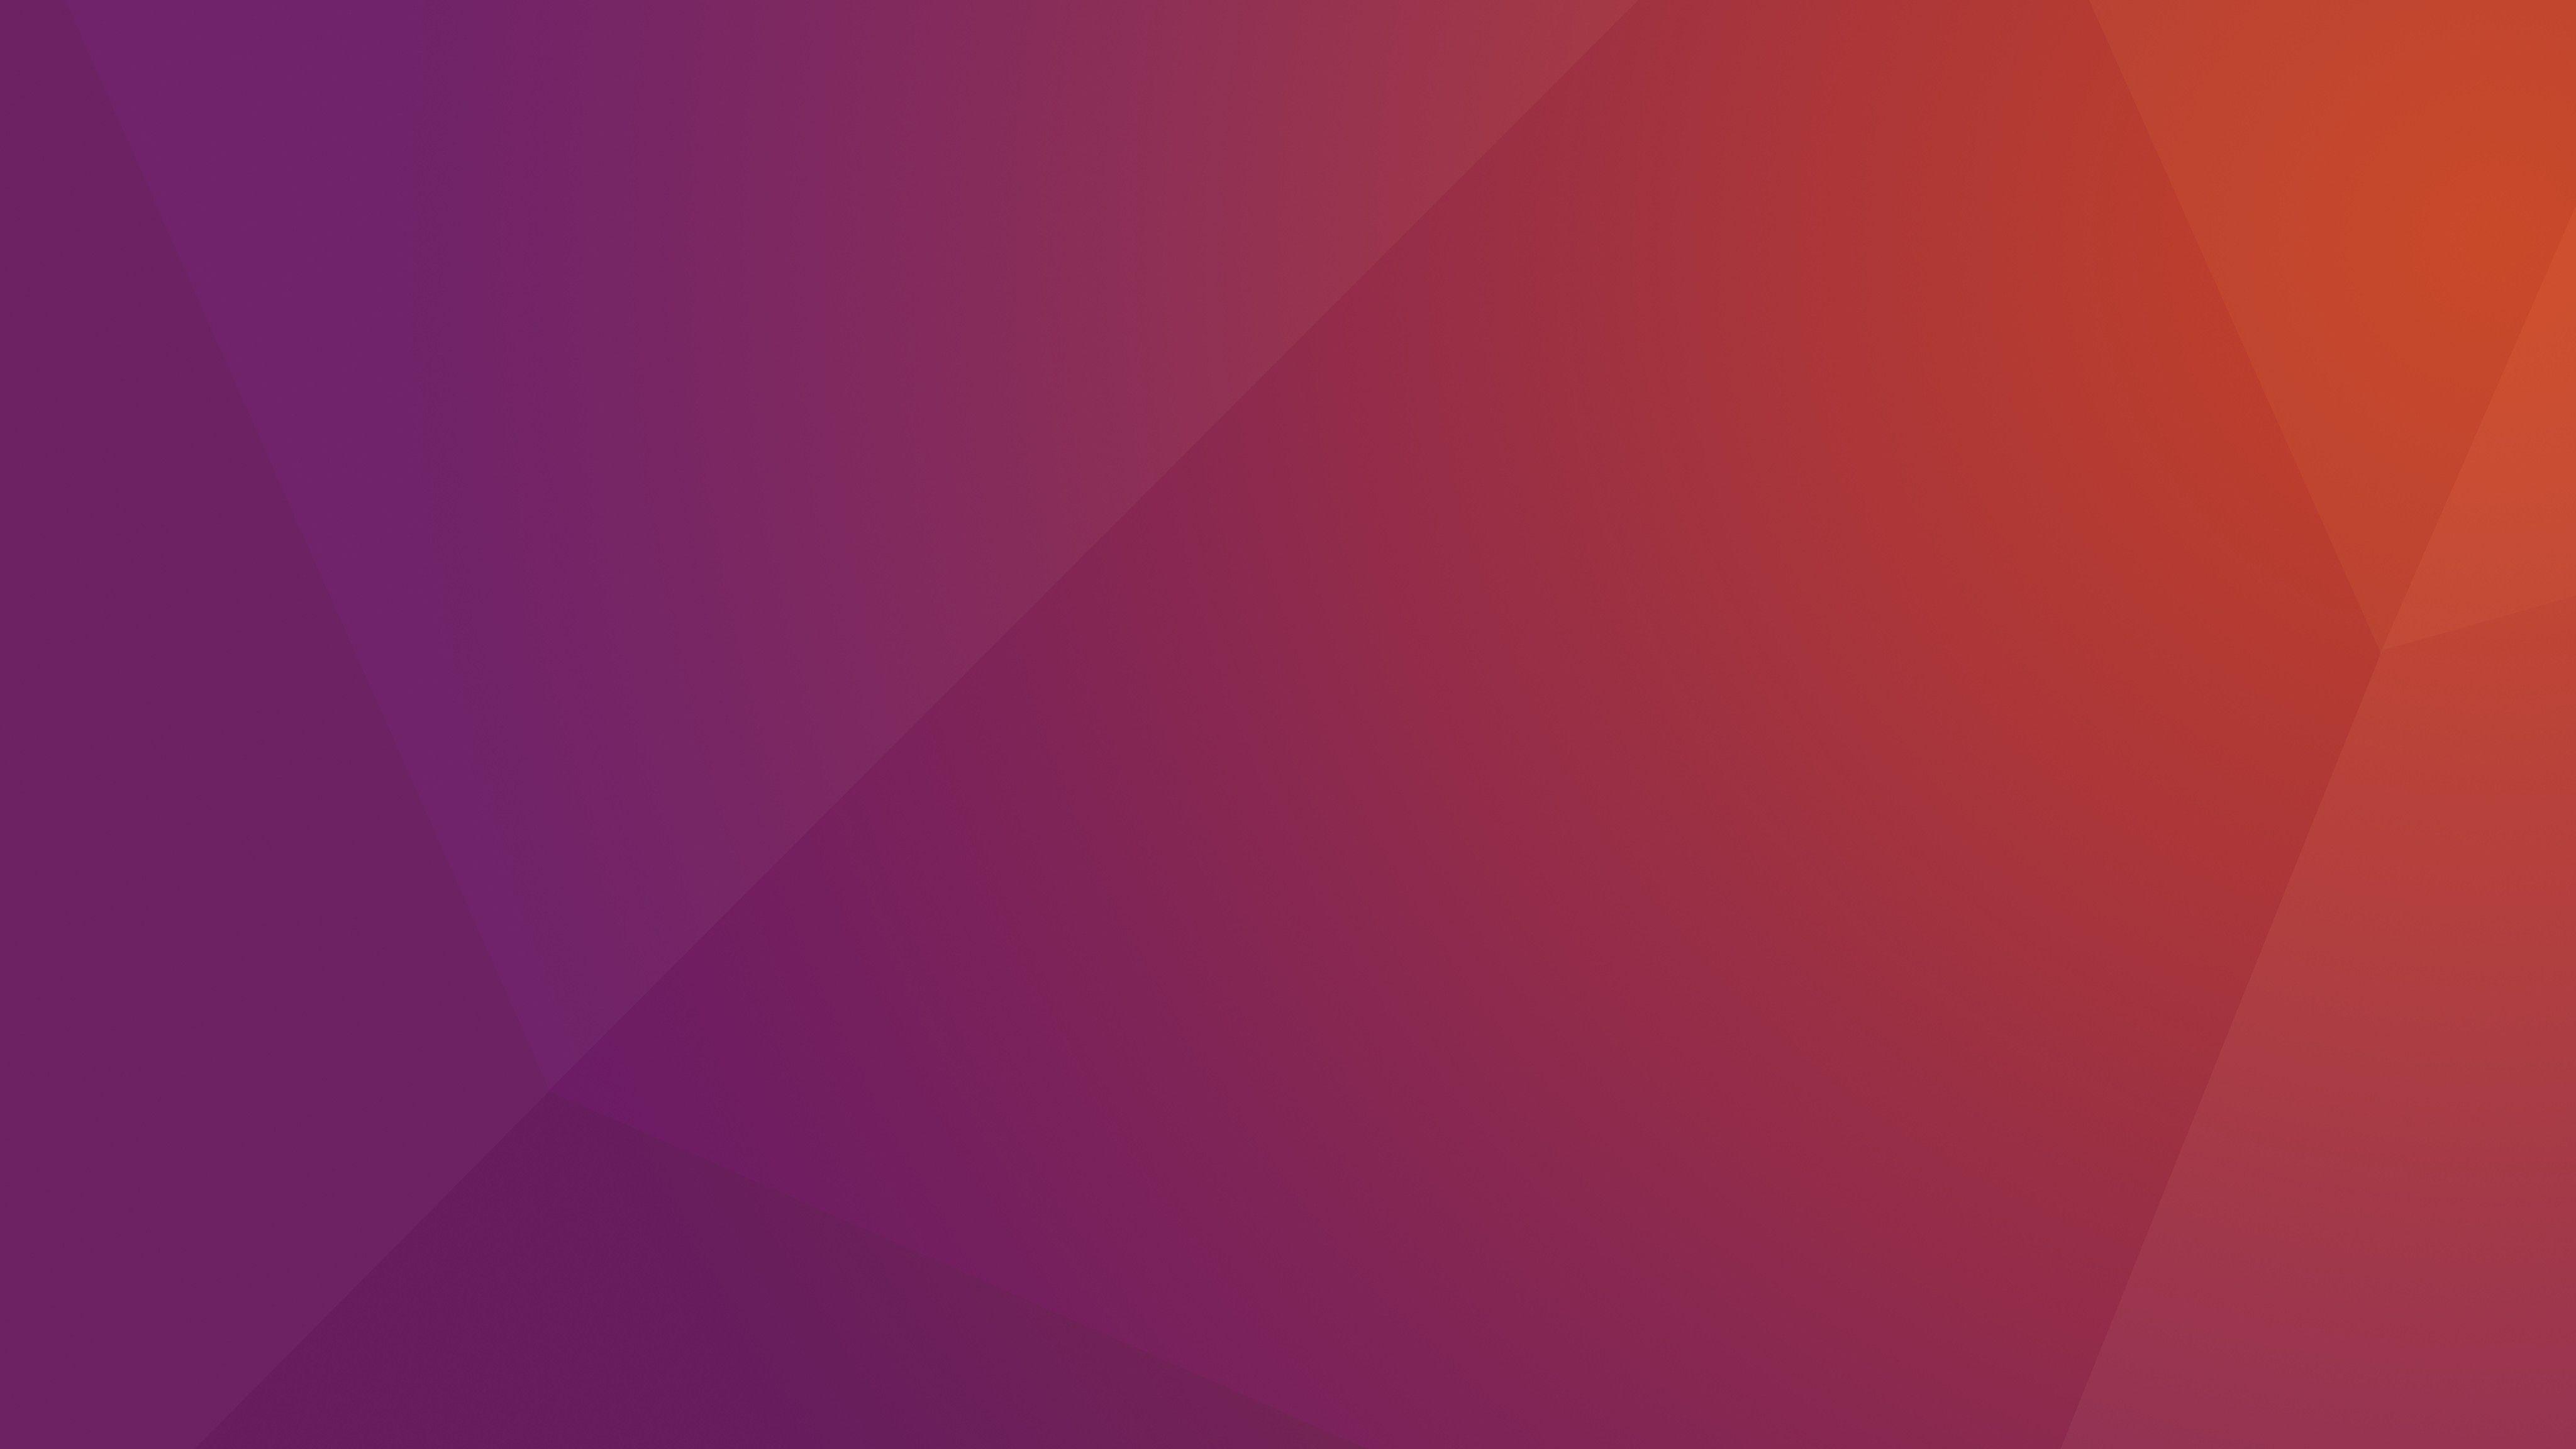 Here is the default set of wallpaper for Ubuntu 16.04 LTS